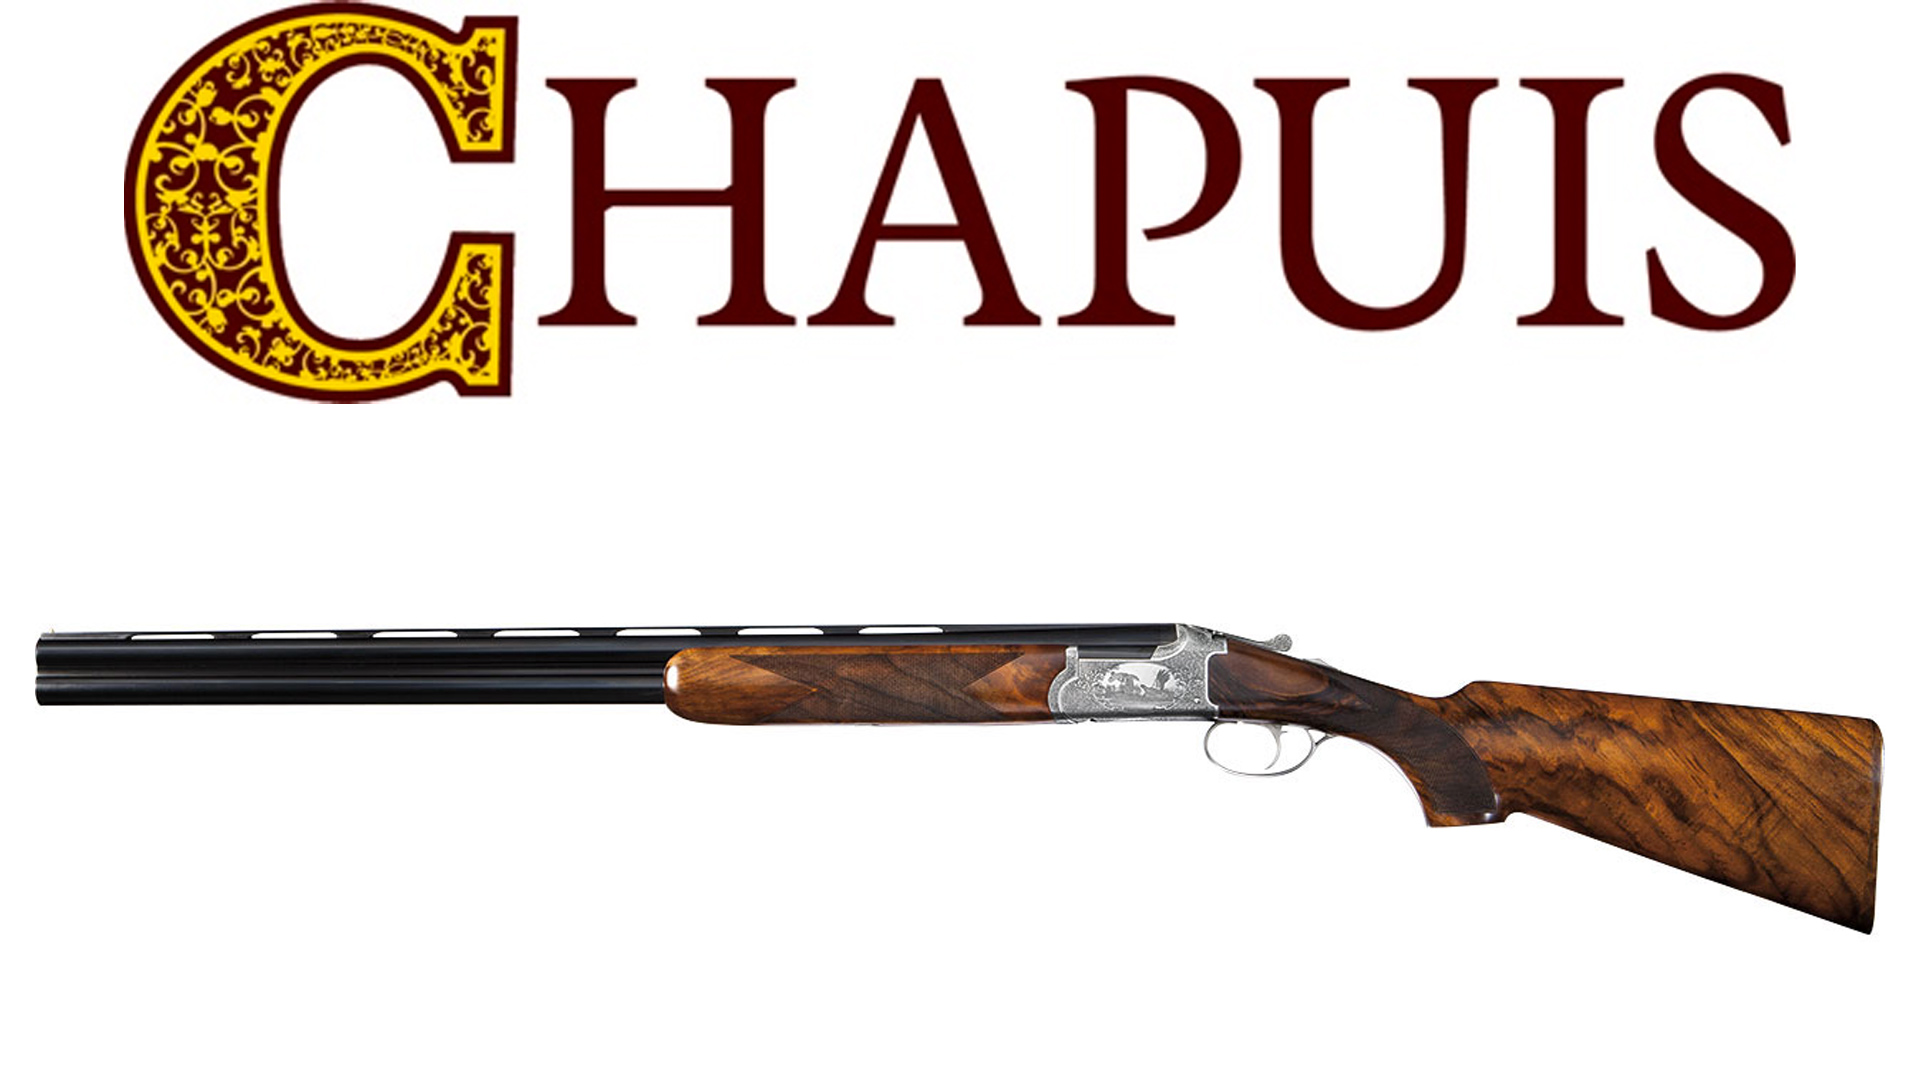 20-facts-about-chapuis-armes